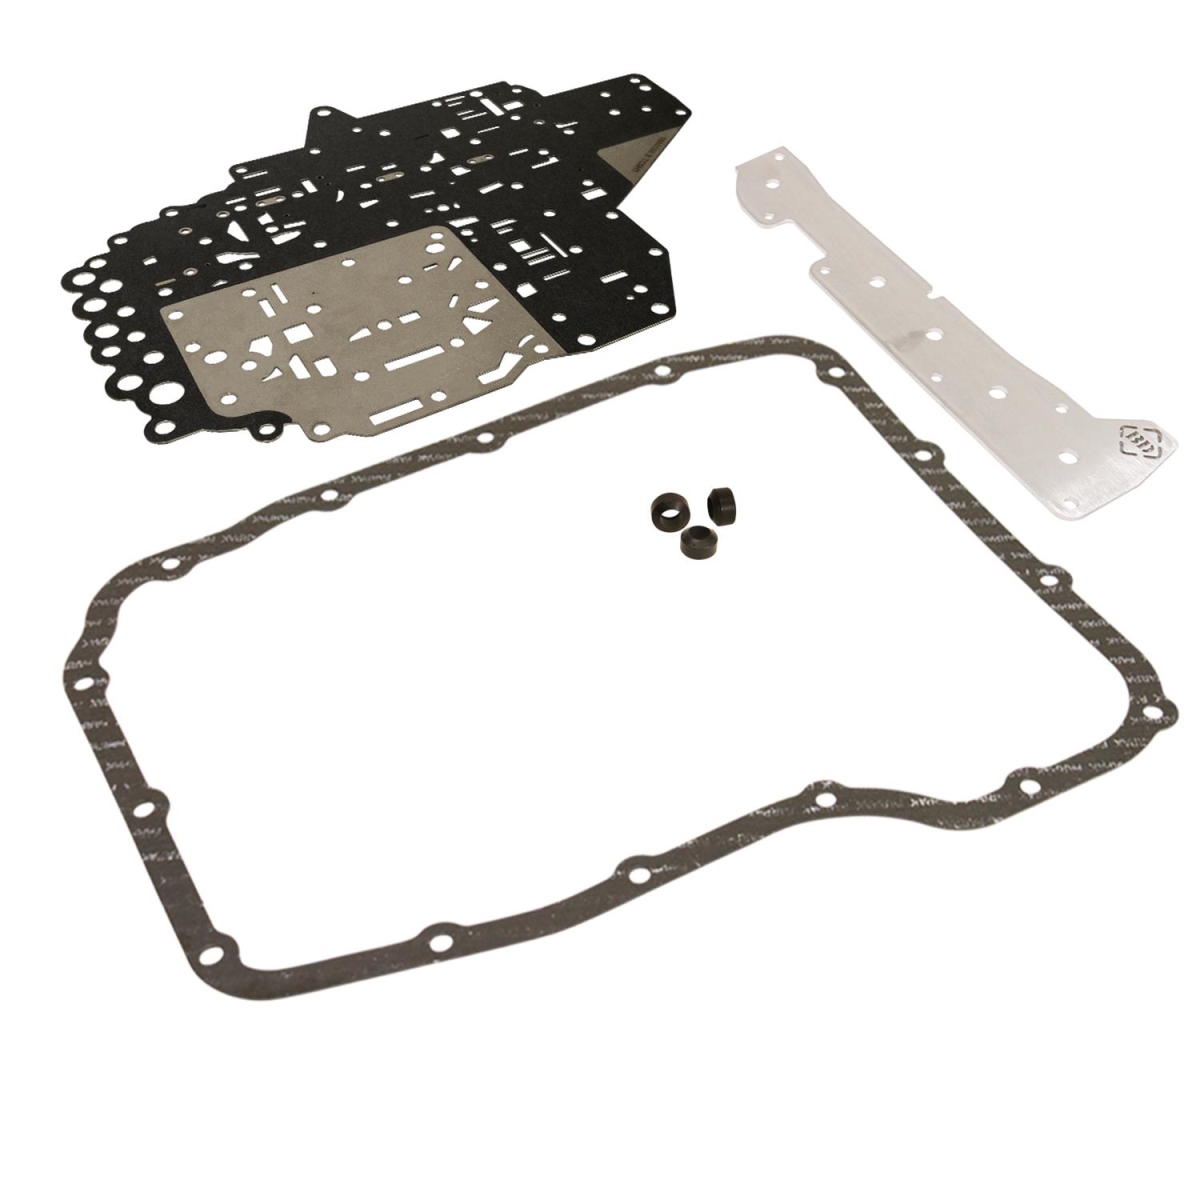 Picture of BD Diesel BDD1030373 Protect68 Gasket Plate Kit for 2007-2018 Dodge Ram 2500